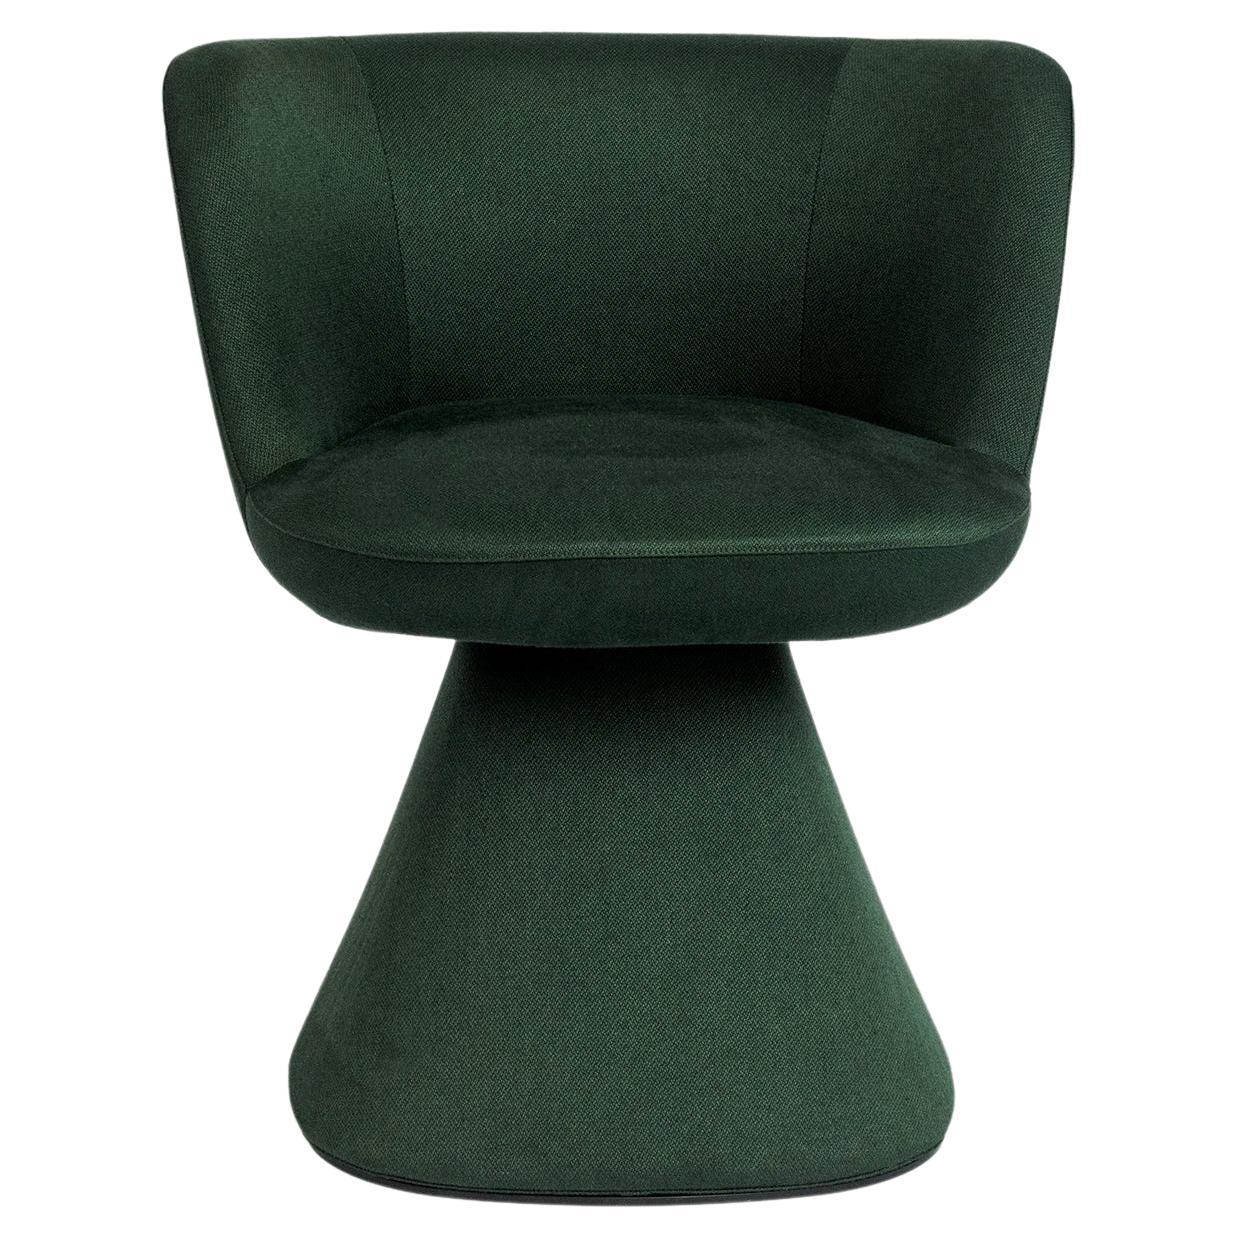 B&B Italia Flair O' Swivel Dining Chair in Forest Green Satin - Available Now For Sale